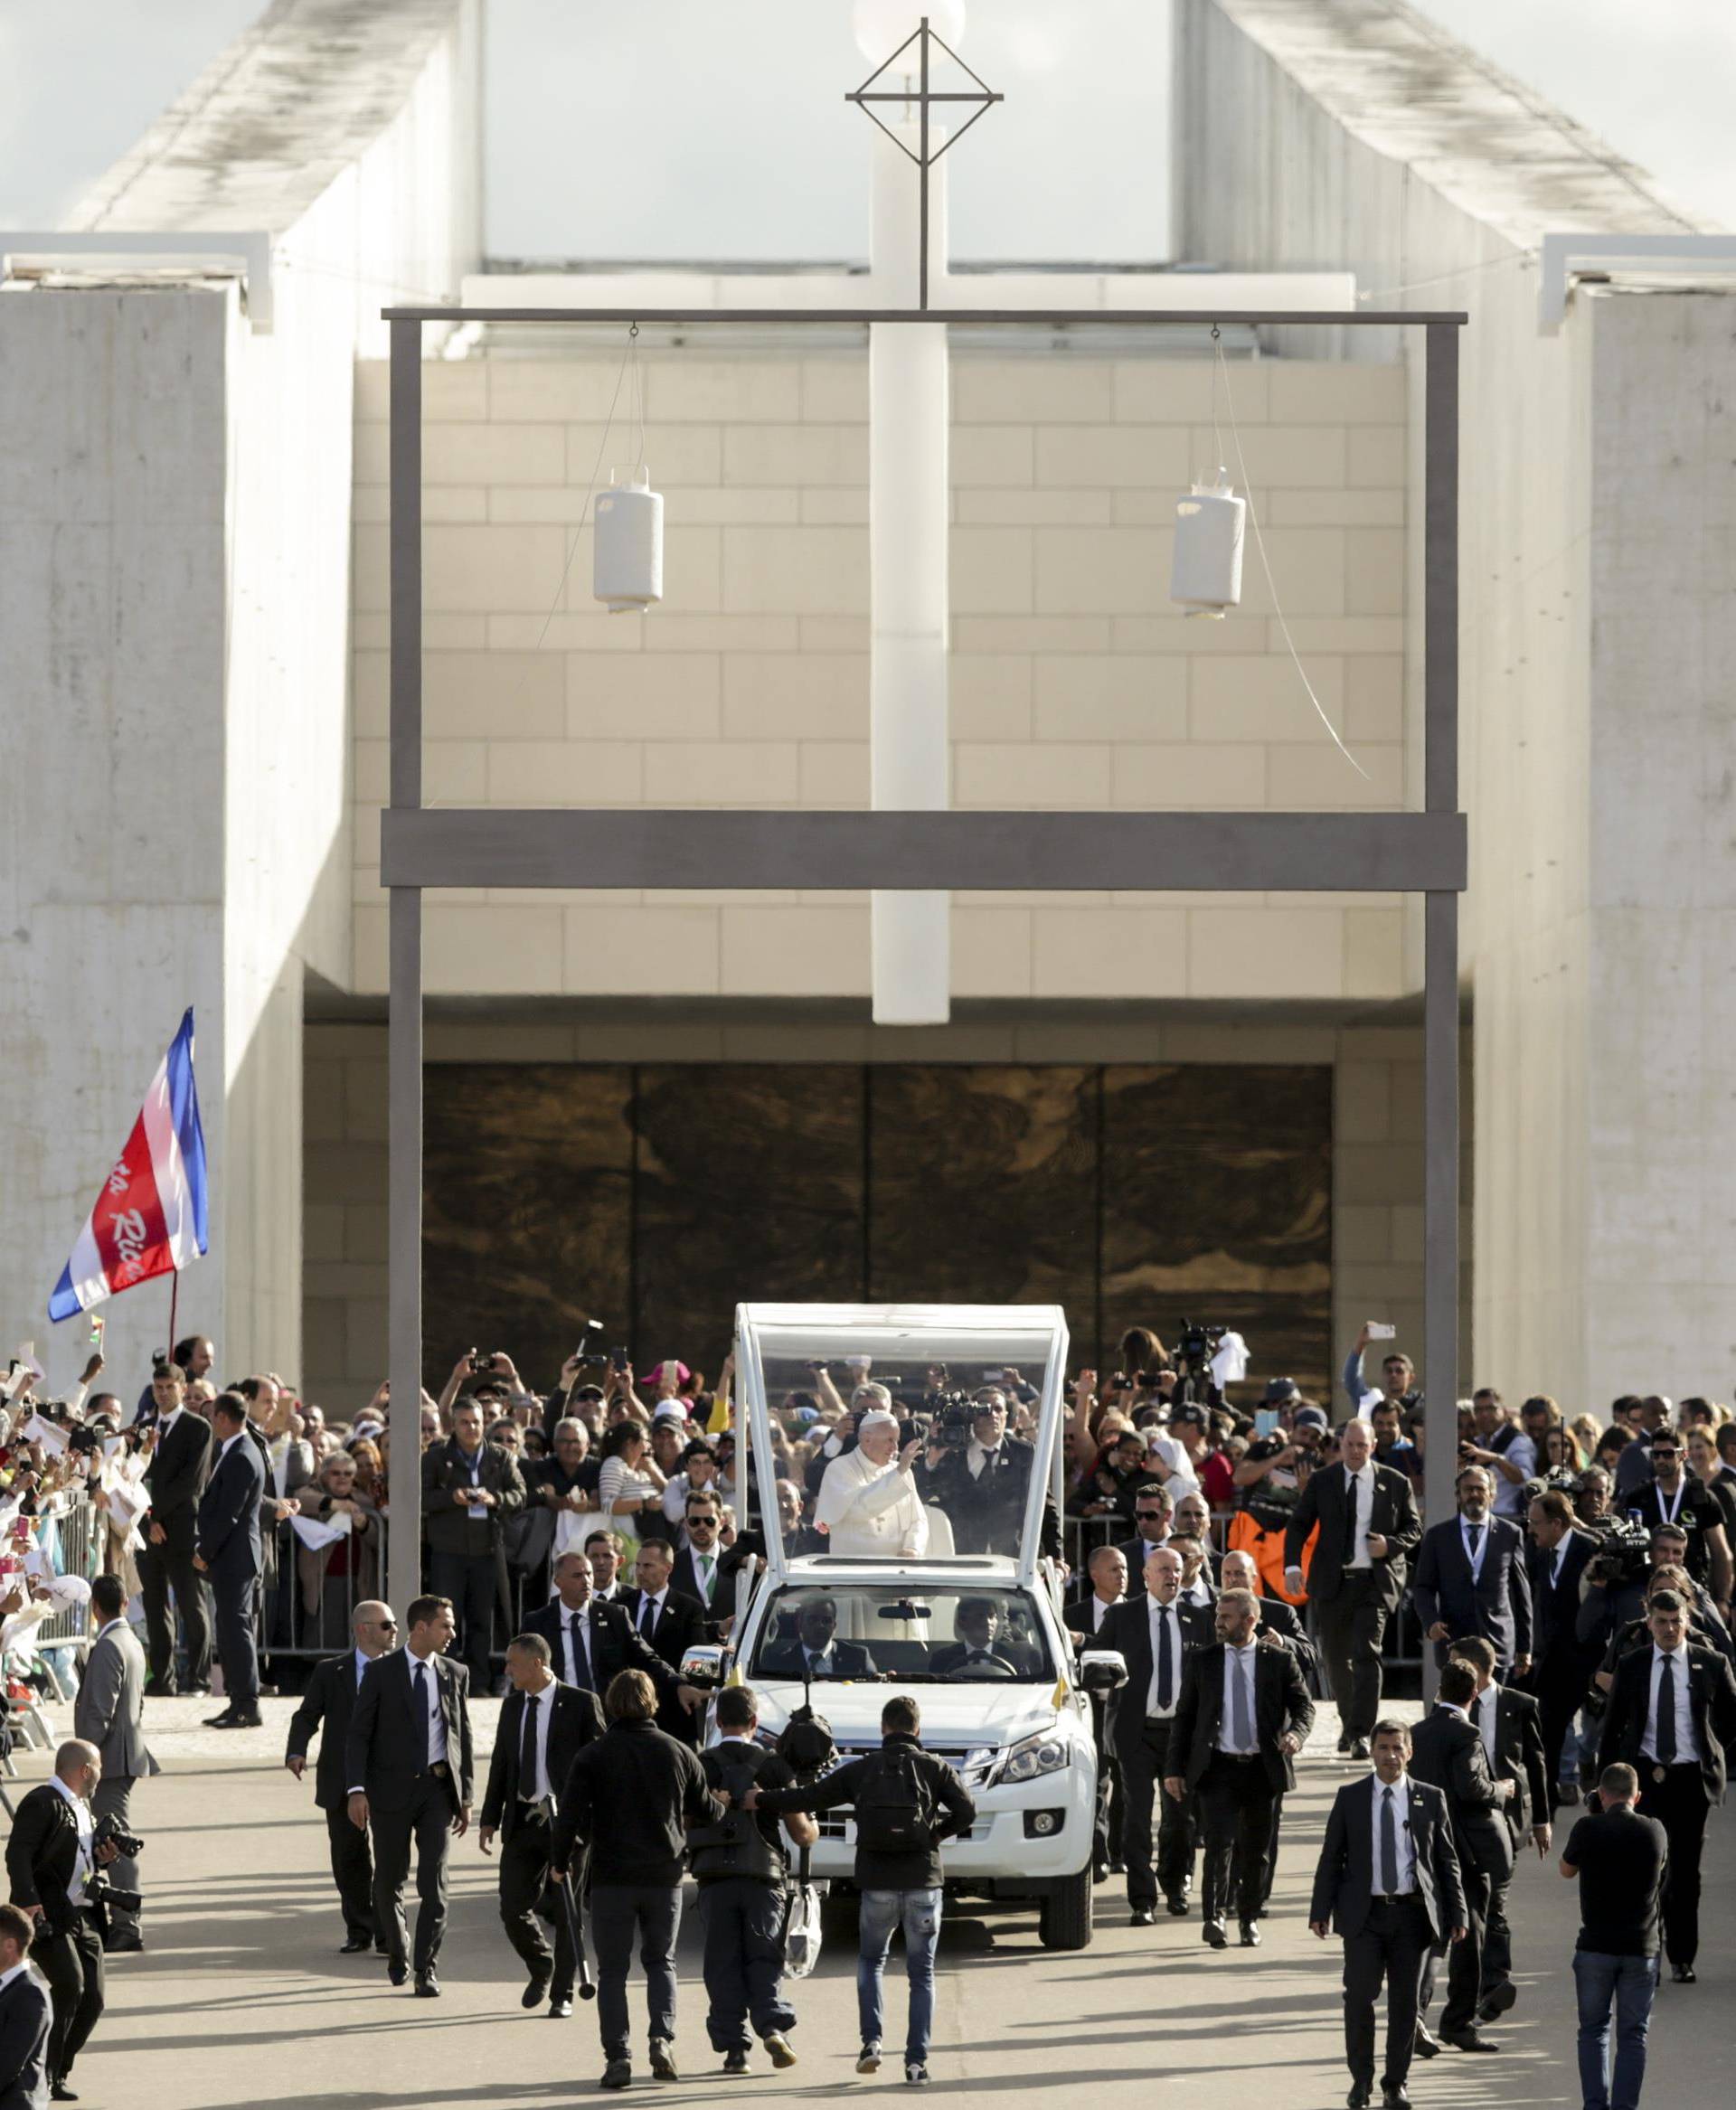 Pope Francis waves as he arrives at the Shrine of Our Lady of Fatima in Portugal